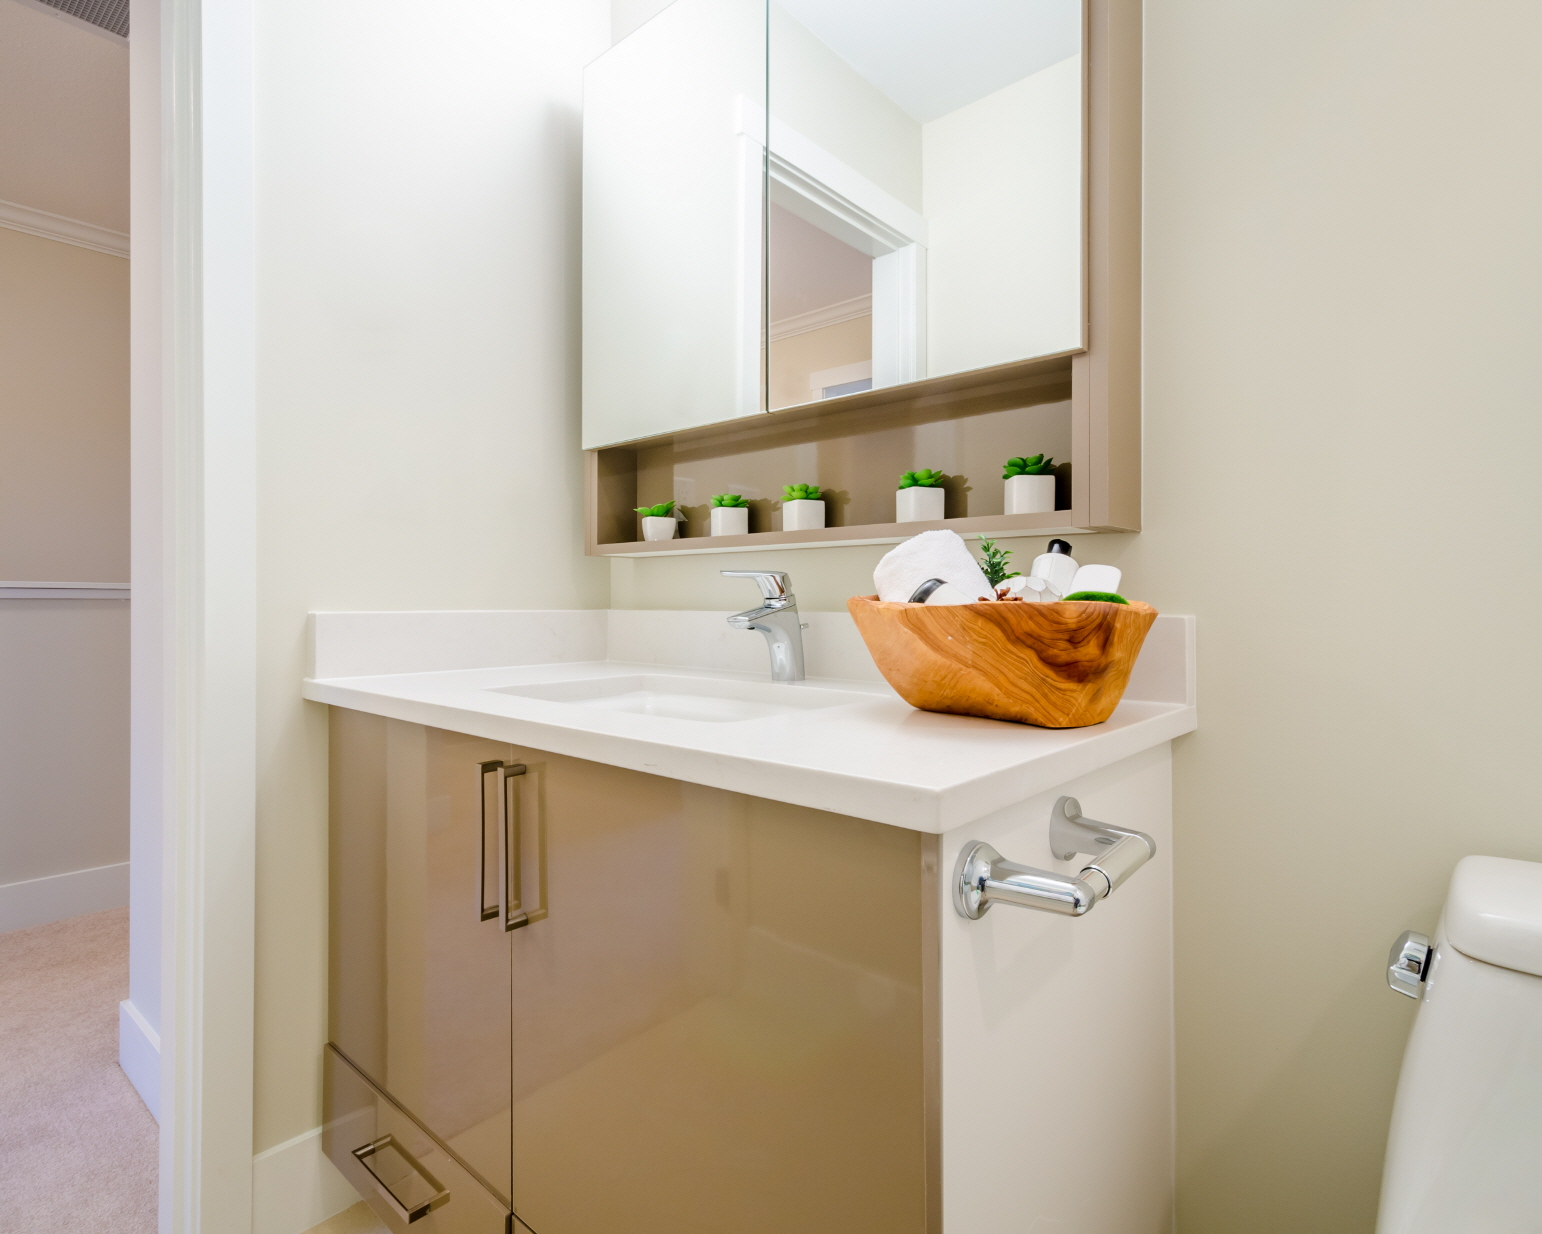 Optimize storage in your small bathroom with a mirror that has hidden storage for toiletries and medicine bottles.